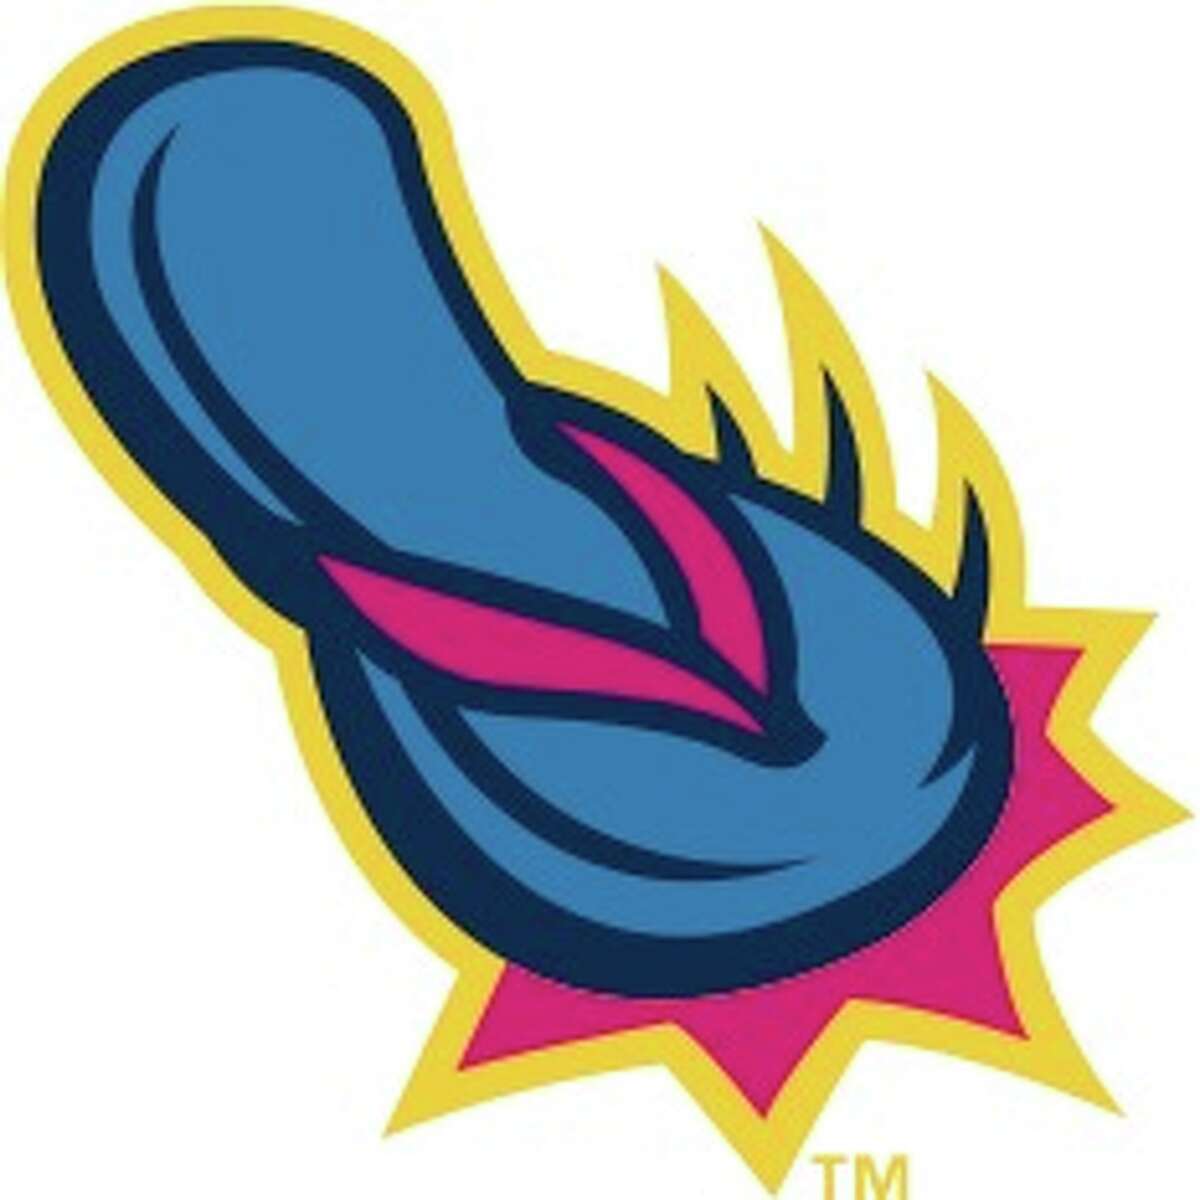 The 2019 logo for the Flying Chanclas de San Antonio, the alternate identity for the San Antonio Missions.